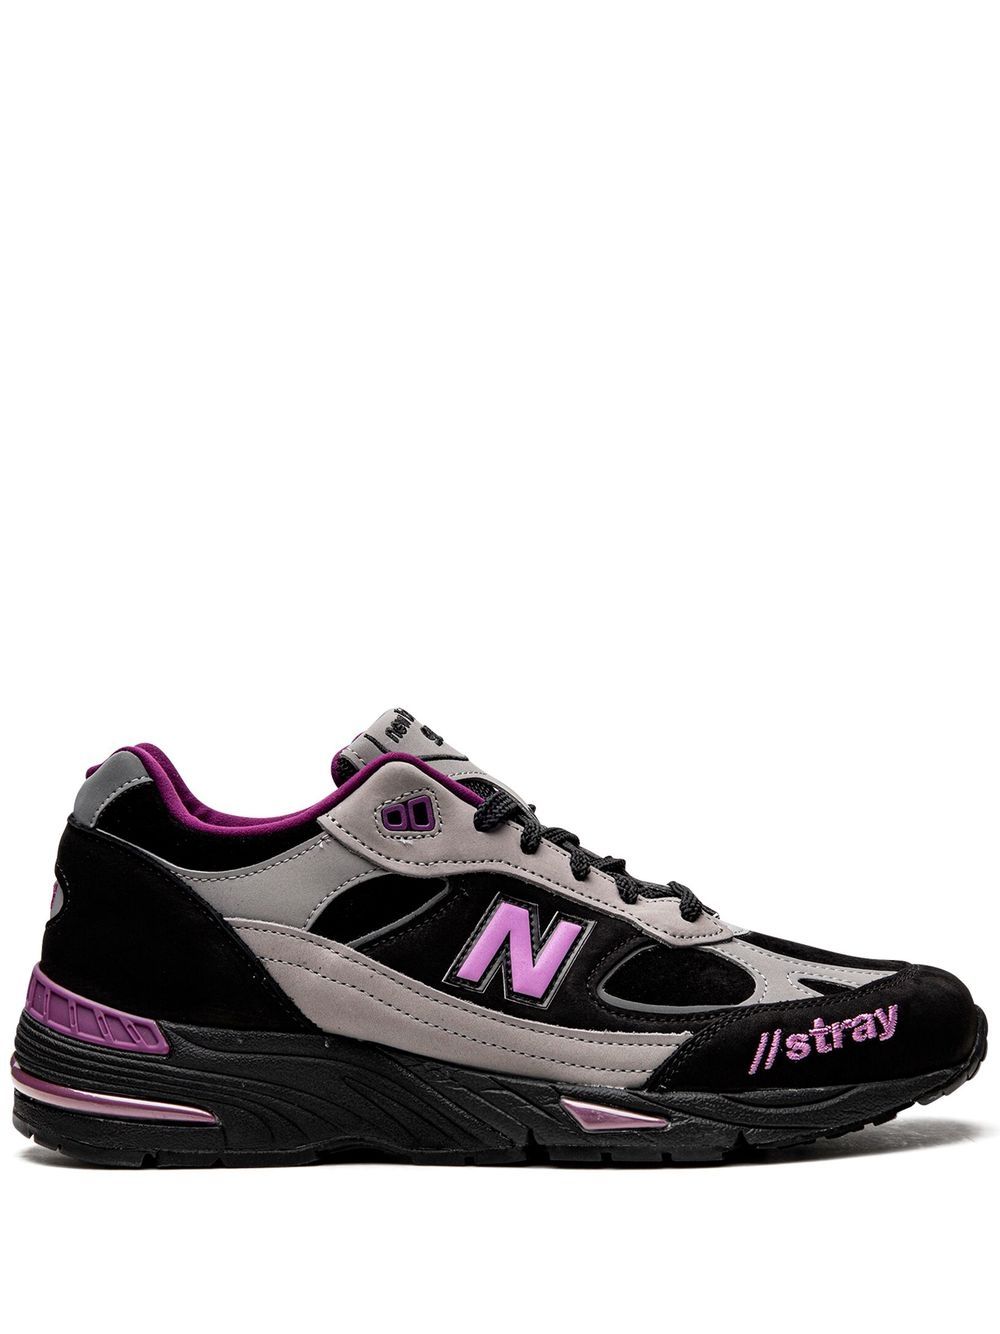 New Balance x Stray Rats 991 low-top sneakers - BLACK/GREY/PINK